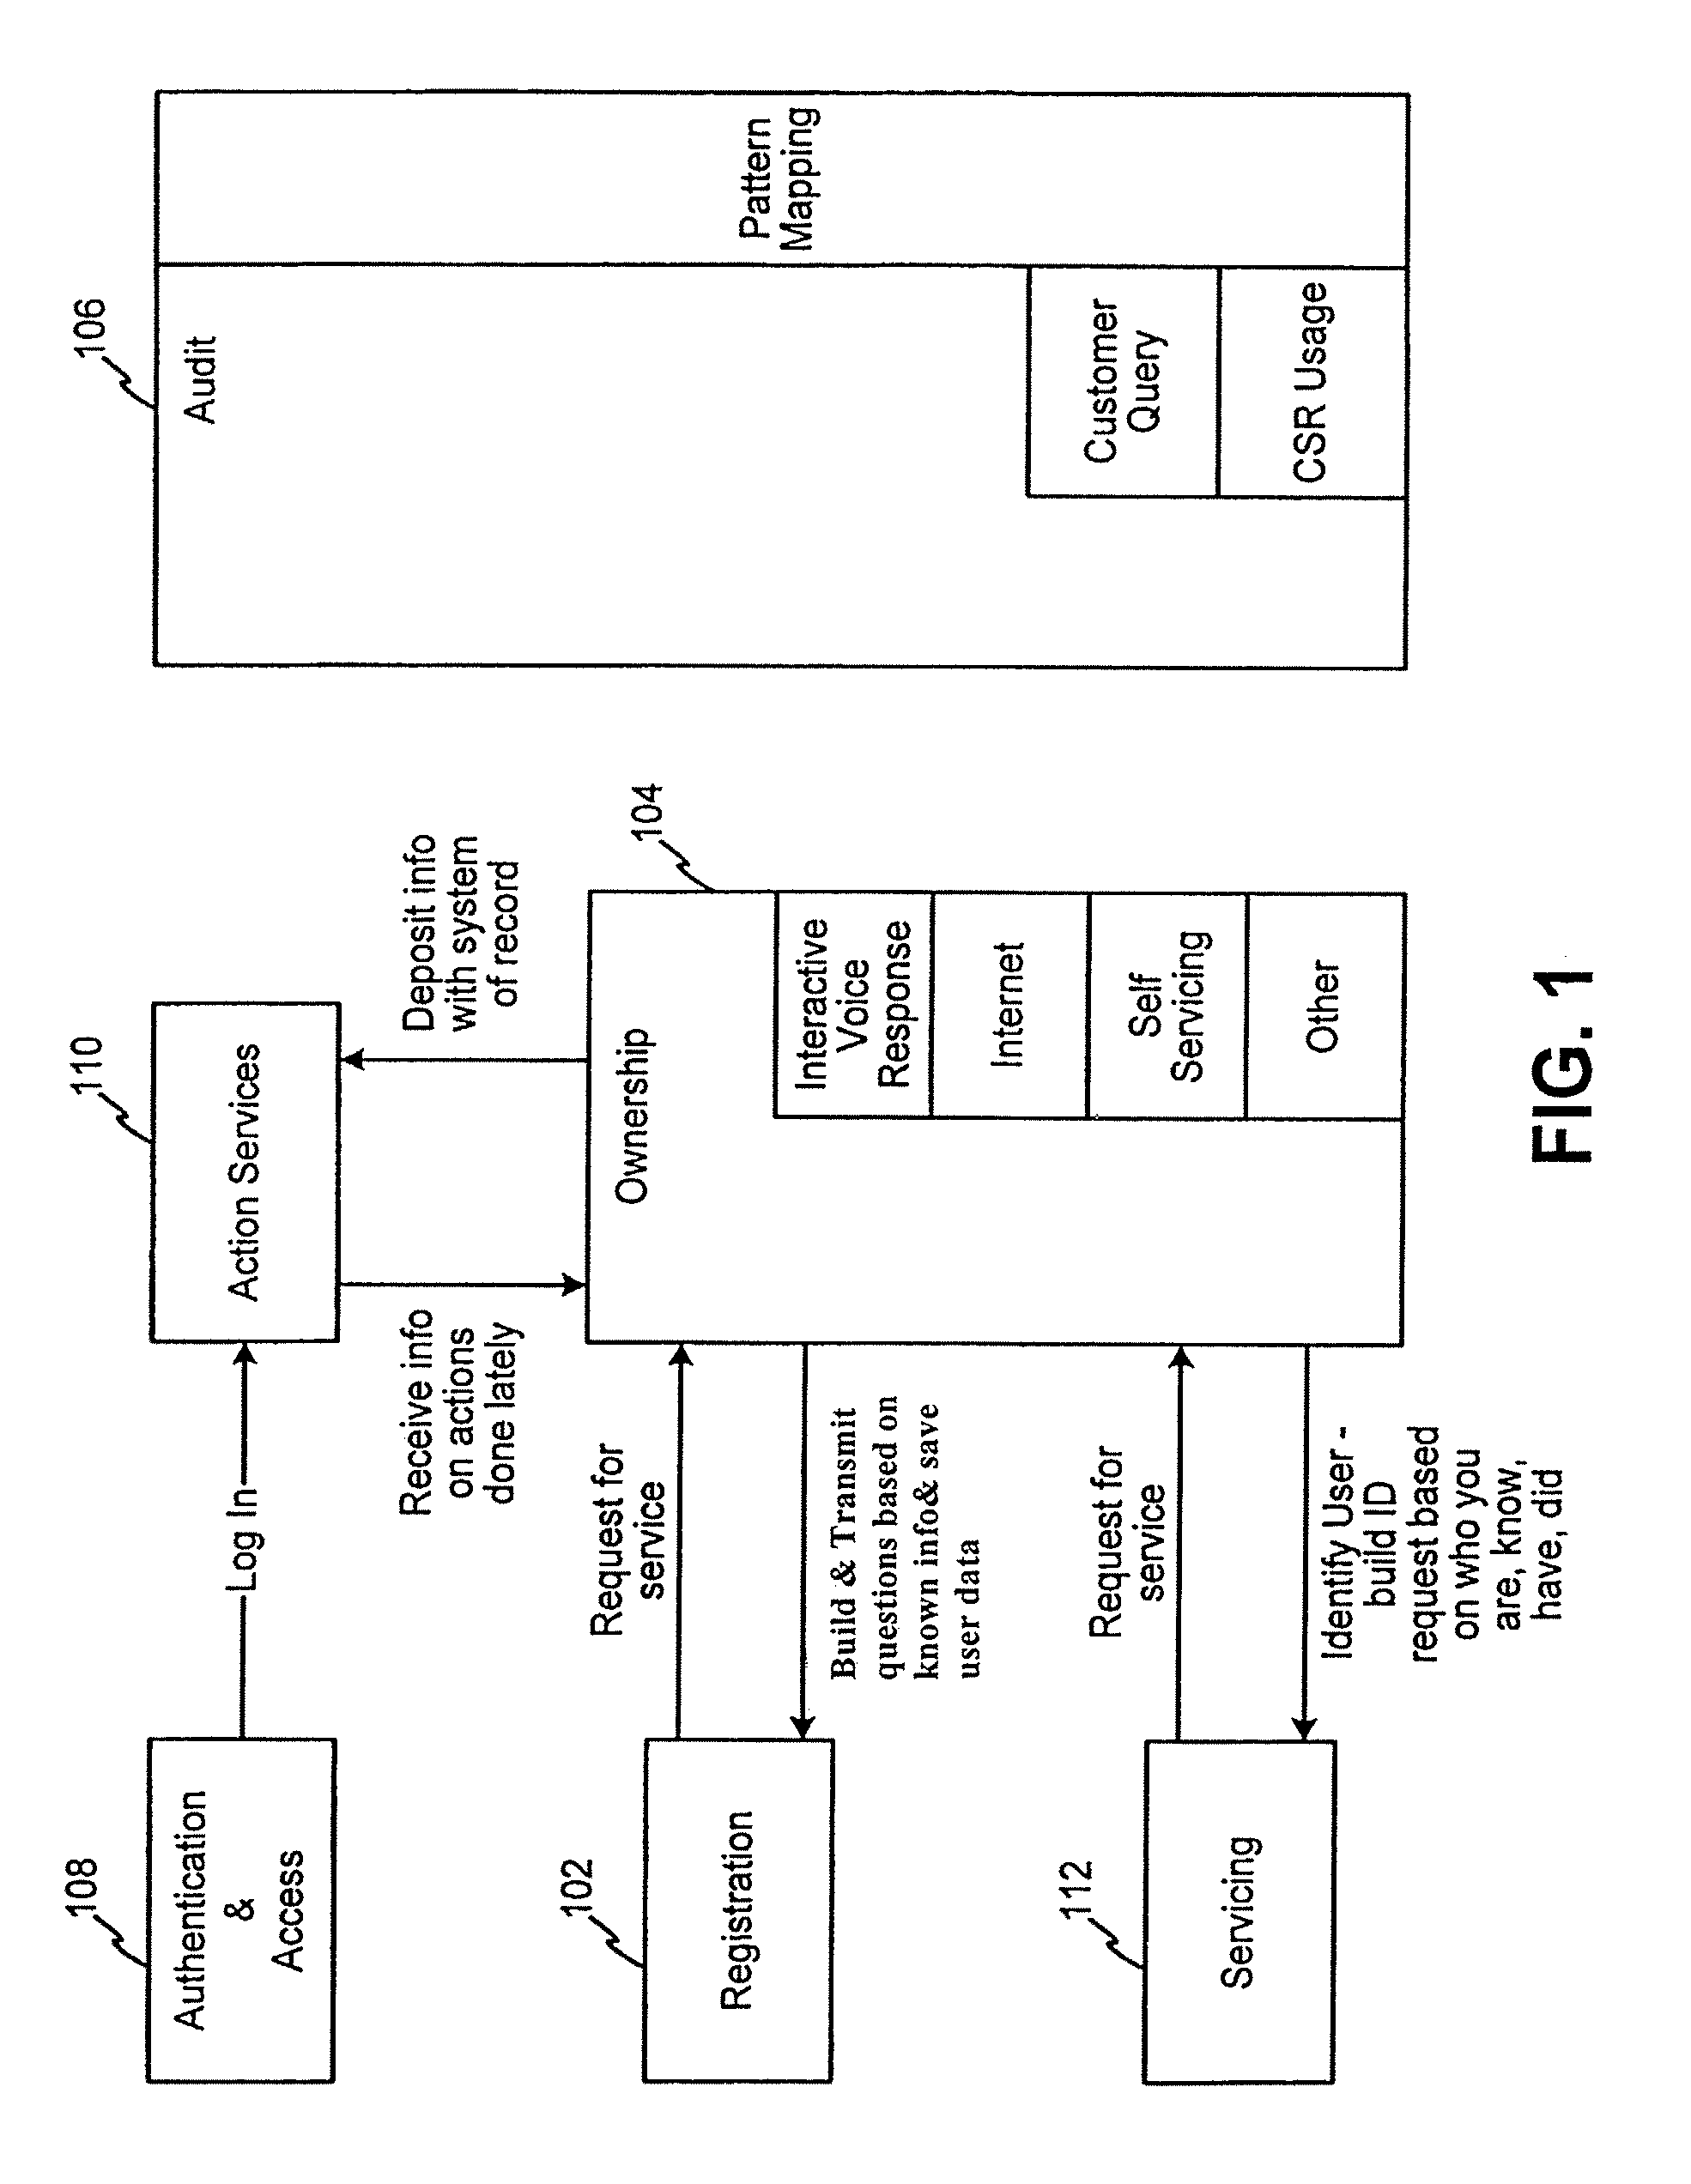 Method and system for implementing and managing an enterprise identity management for distributed security in a computer system